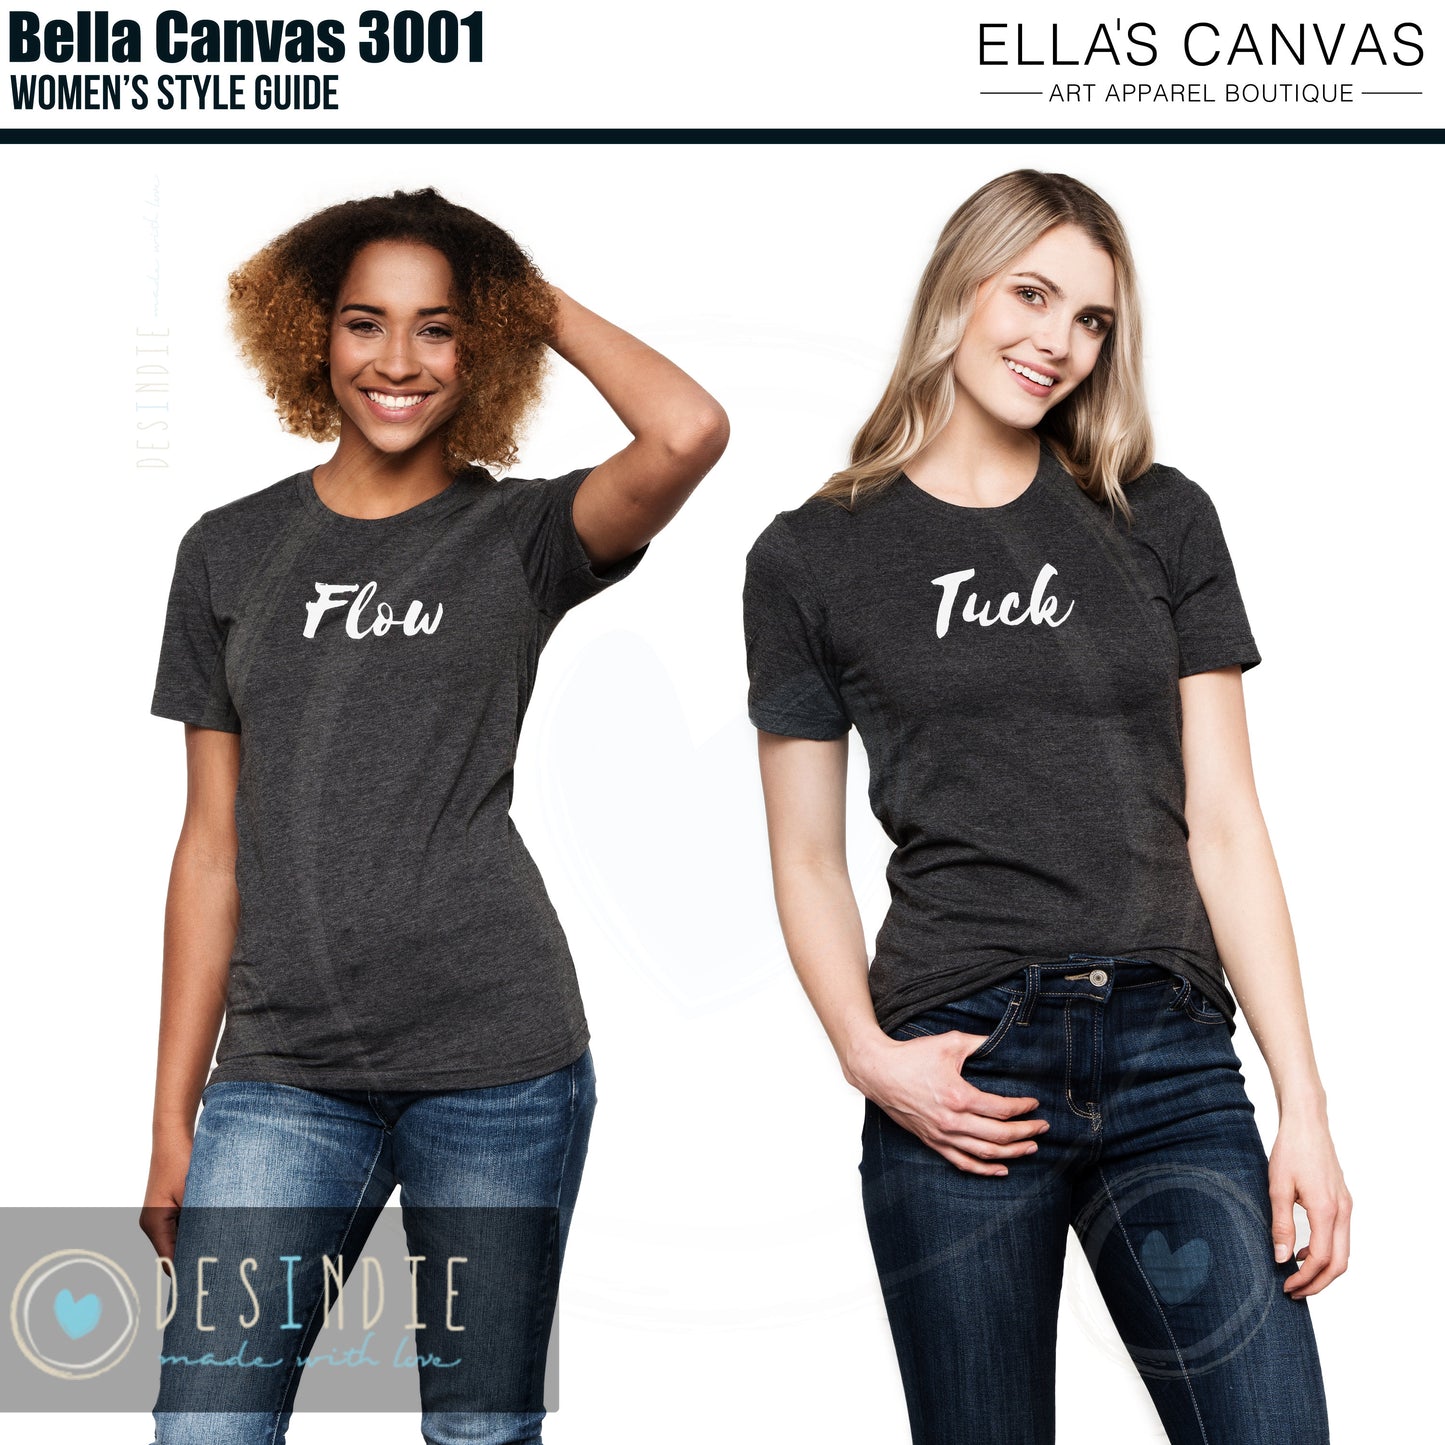 Be A Cactus In A World Full of Panies Style Ultra Soft Graphic Tee Unisex Soft Tee T-shirt for Women or Men